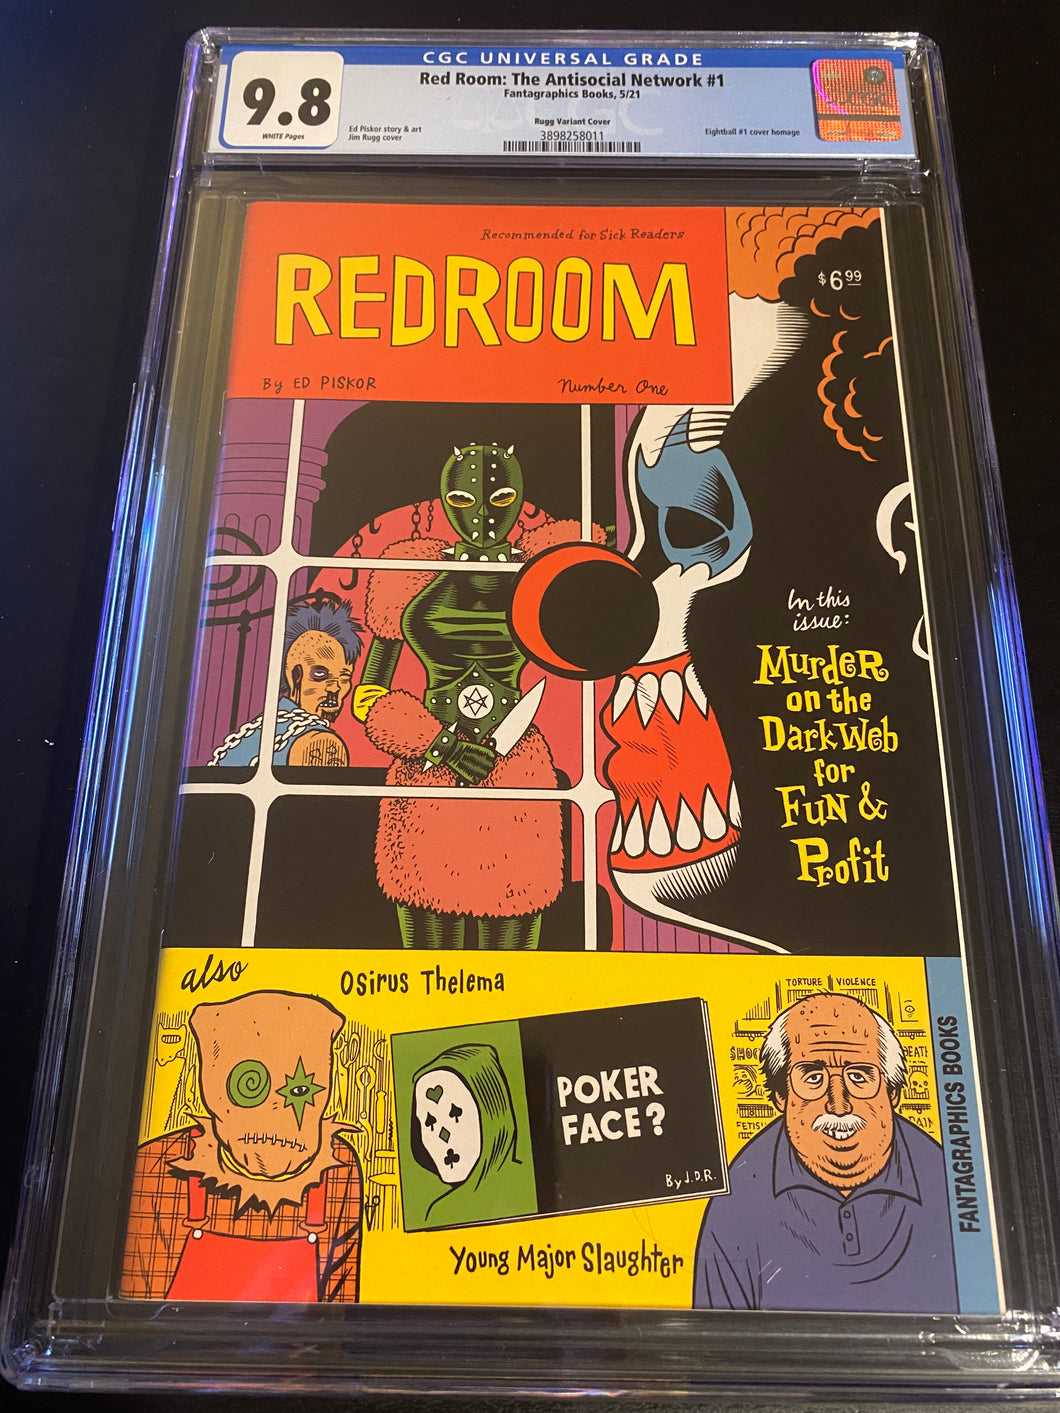 CGC 9.8 Red Room The Antisocial Network #1 RATIO 1:12